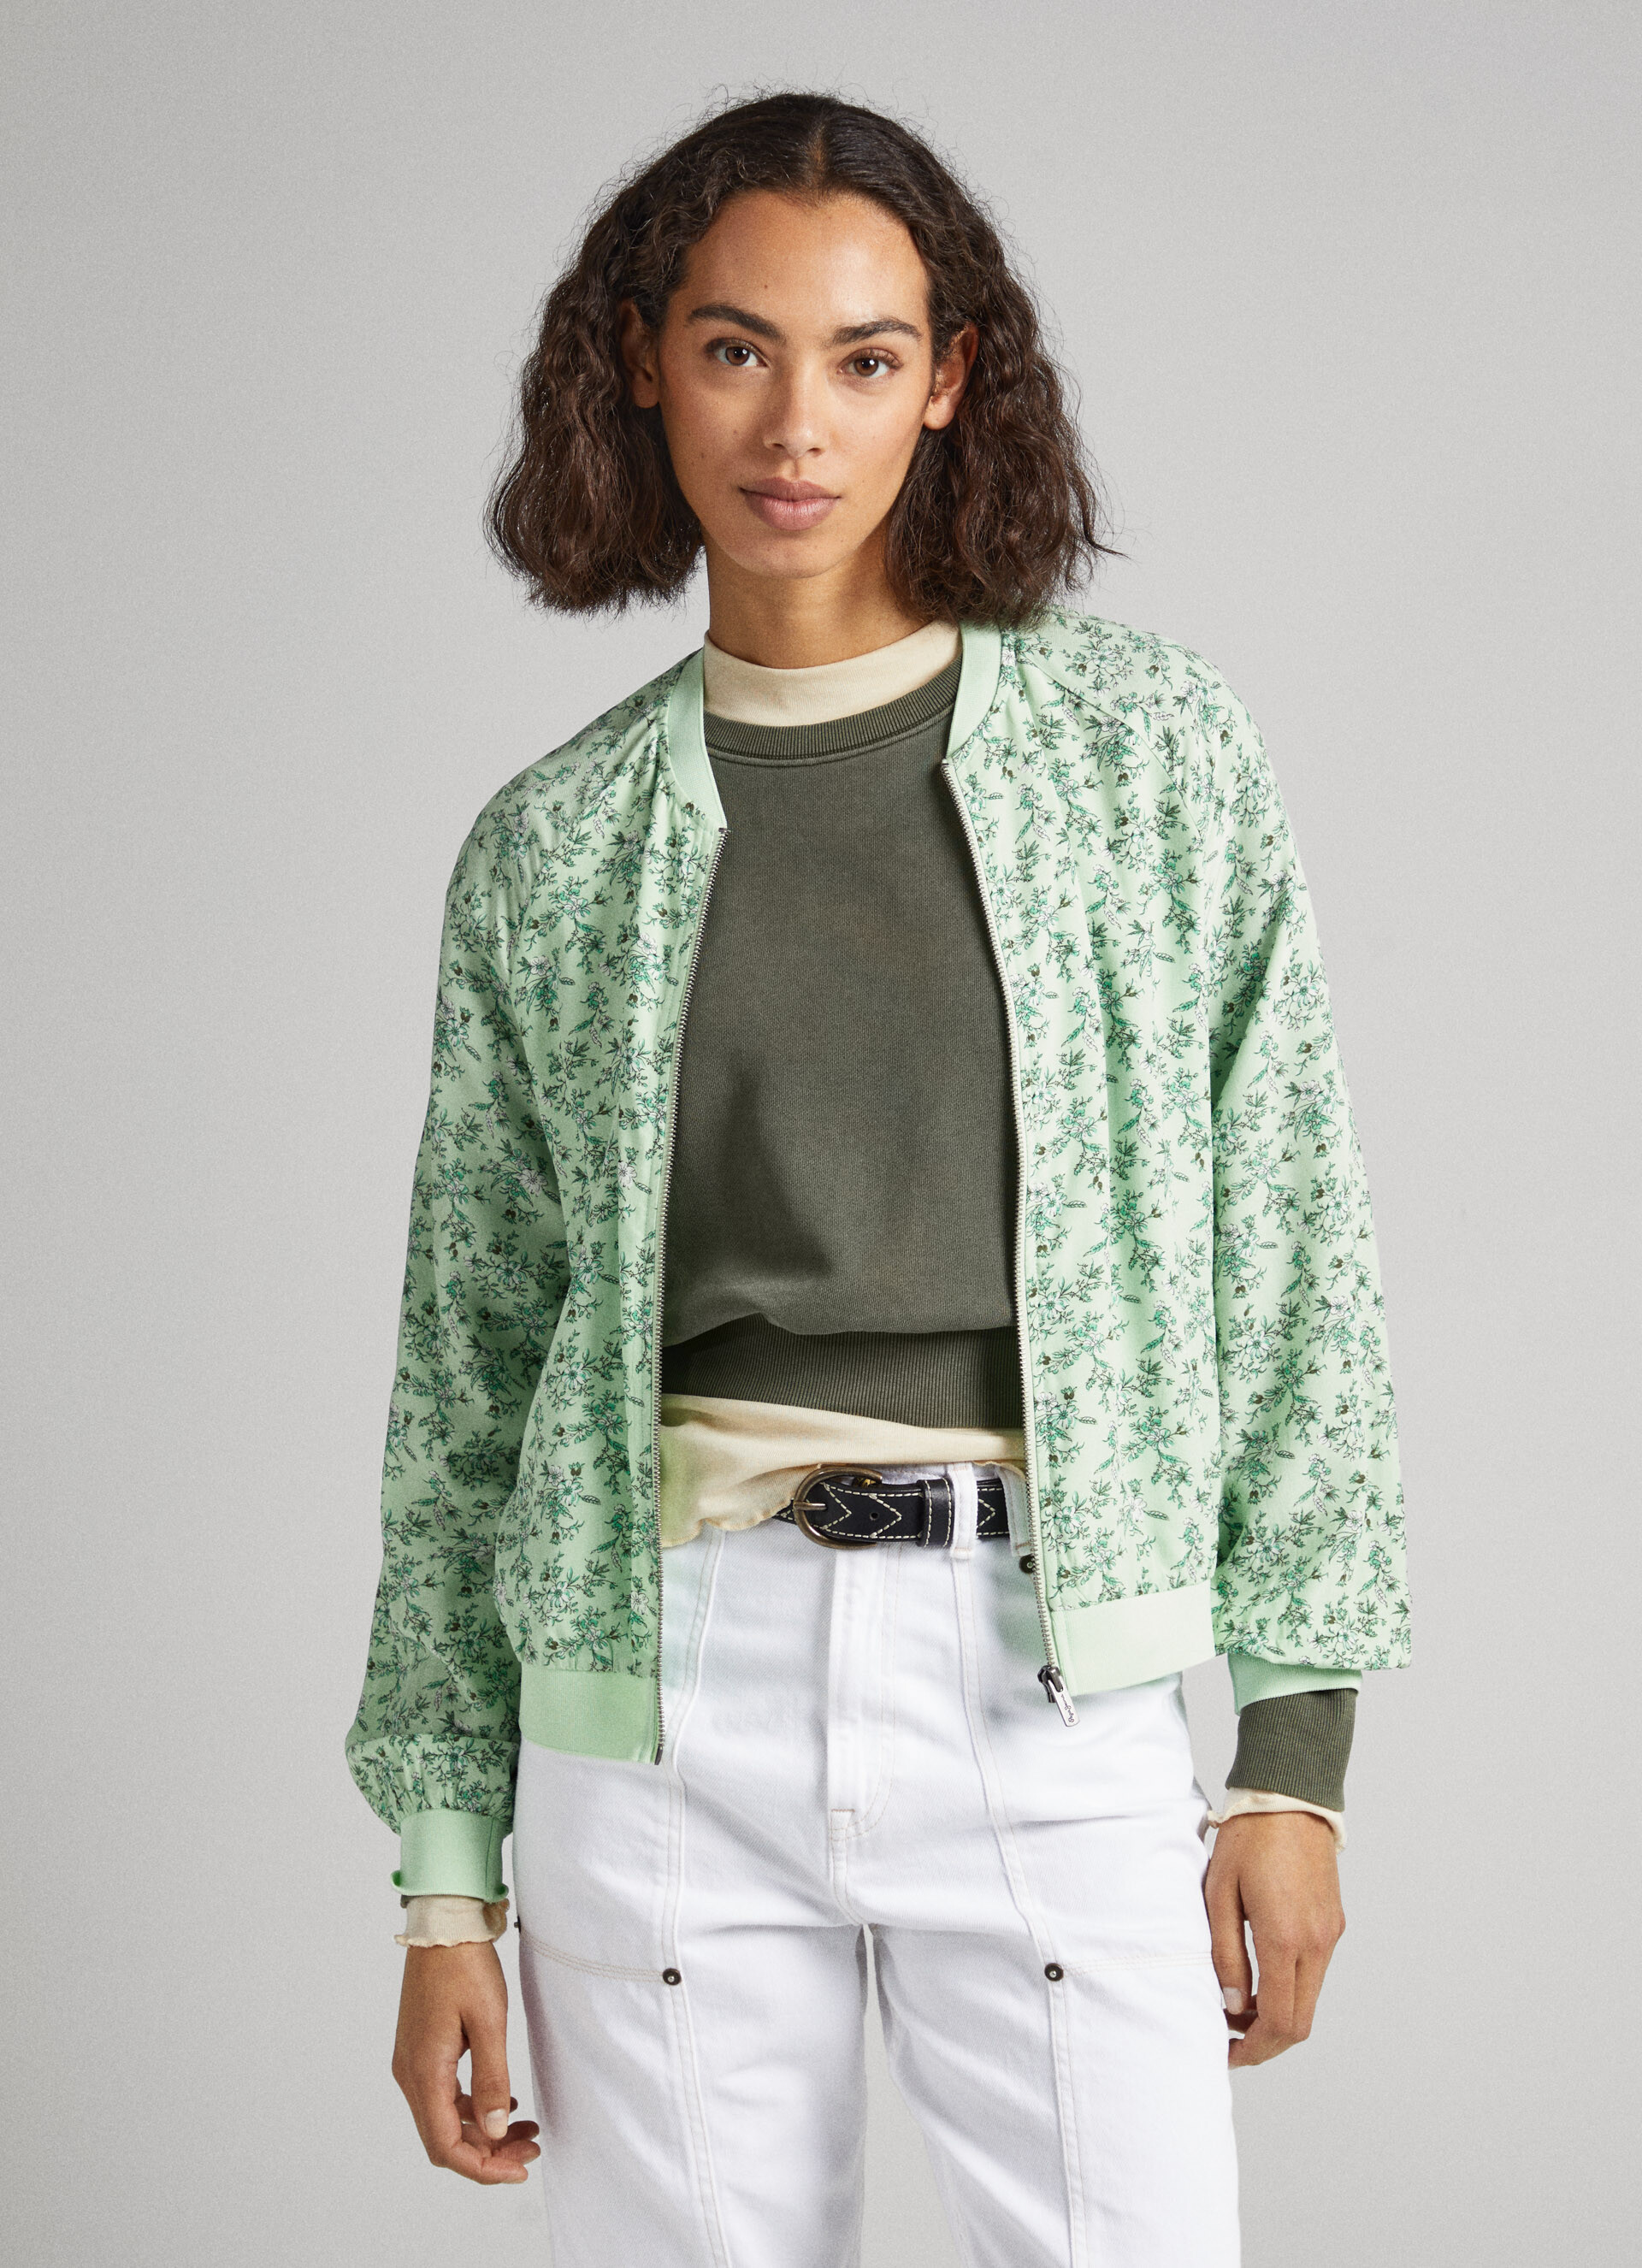 Giacca Bomber Stampa Floreale | Pepe Jeans